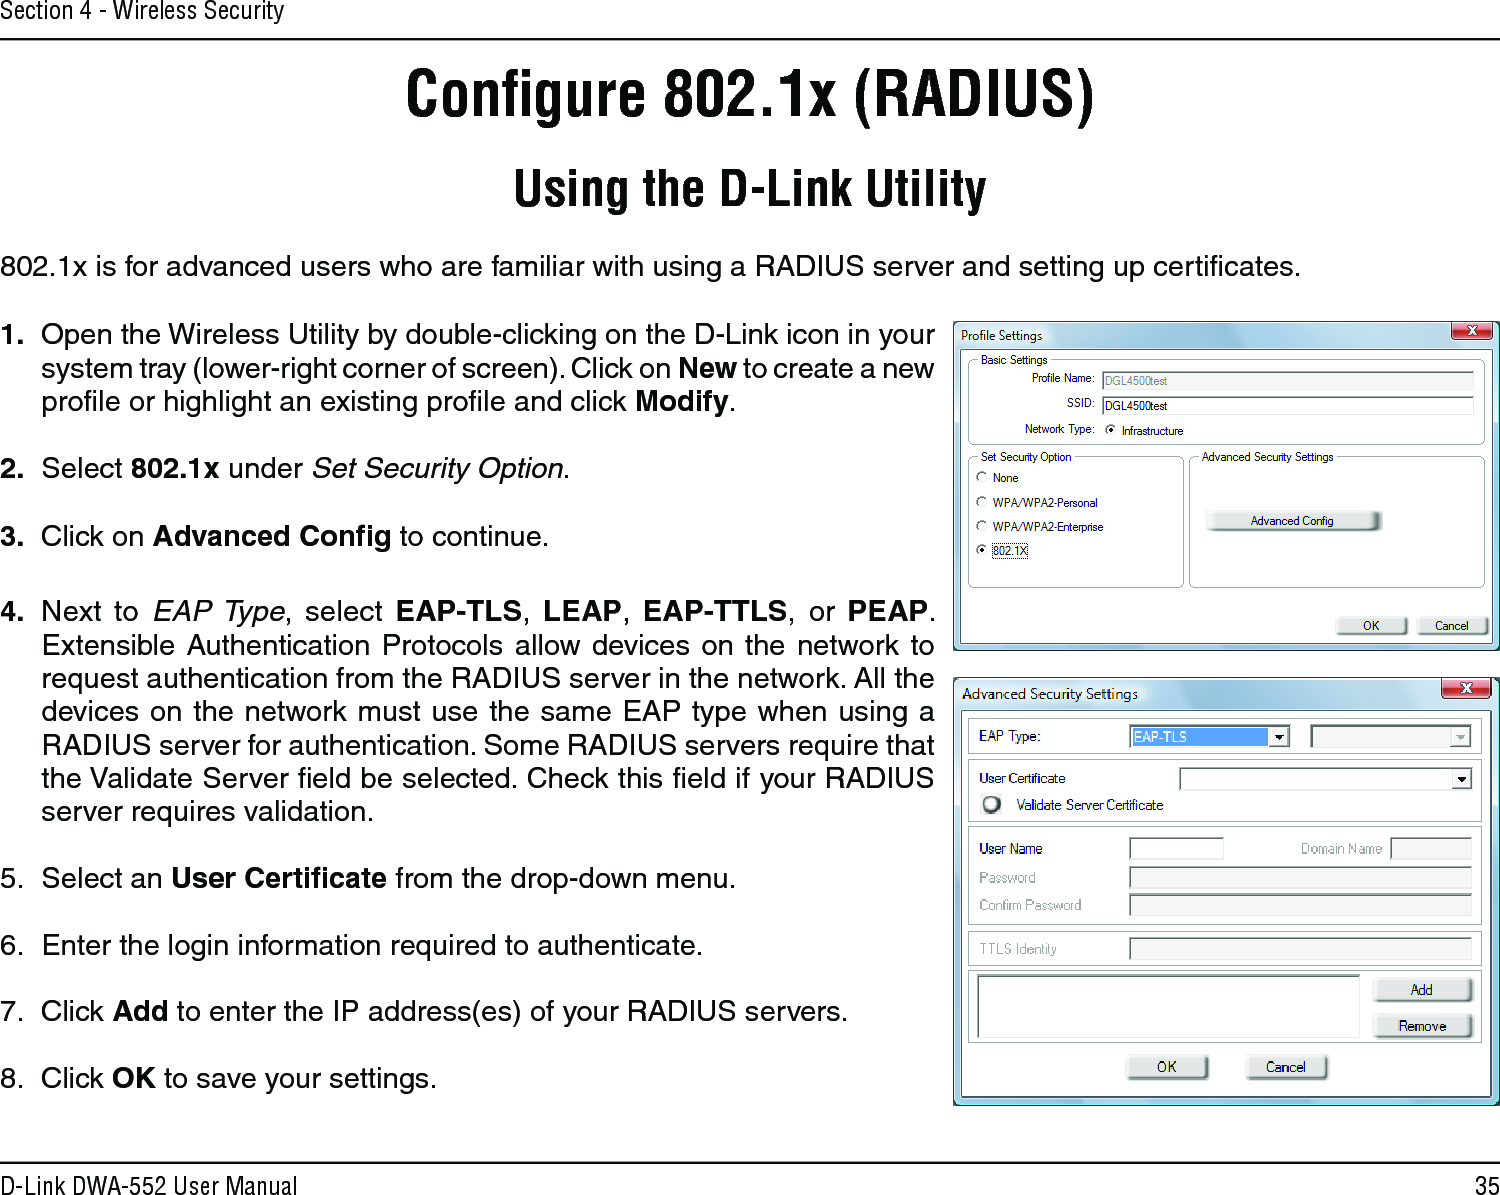 35D-Link DWA-552 User ManualSection 4 - Wireless SecurityConﬁgure 802.1x (RADIUS)Using the D-Link Utility802.1x is for advanced users who are familiar with using a RADIUS server and setting up certiﬁcates.1.  Open the Wireless Utility by double-clicking on the D-Link icon in your system tray (lower-right corner of screen). Click on New to create a new proﬁle or highlight an existing proﬁle and click Modify. 2.  Select 802.1x under Set Security Option.3.  Click on Advanced Conﬁg to continue.4.  Next  to  EAP Type,  select  EAP-TLS,  LEAP,  EAP-TTLS,  or  PEAP. Extensible  Authentication Protocols allow devices  on the network to request authentication from the RADIUS server in the network. All the devices on the network must use the same EAP type when using a RADIUS server for authentication. Some RADIUS servers require that the Validate Server ﬁeld be selected. Check this ﬁeld if your RADIUS server requires validation.5.  Select an User Certiﬁcate from the drop-down menu.6.  Enter the login information required to authenticate.7.  Click Add to enter the IP address(es) of your RADIUS servers.8.  Click OK to save your settings.